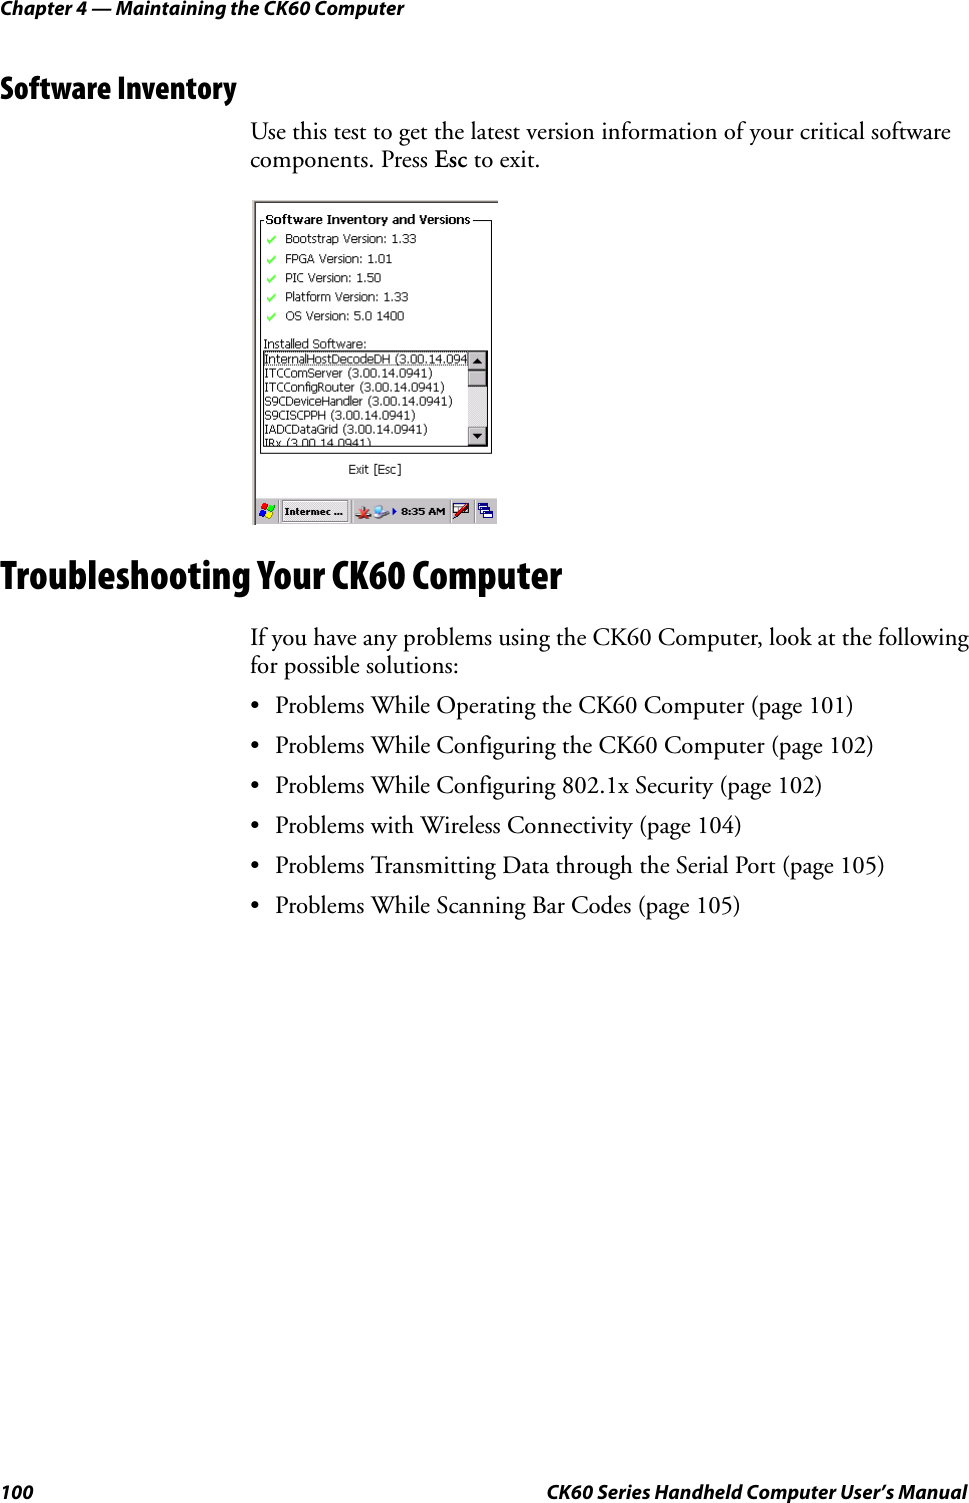 Chapter 4 — Maintaining the CK60 Computer100 CK60 Series Handheld Computer User’s ManualSoftware InventoryUse this test to get the latest version information of your critical software components. Press Esc to exit.Troubleshooting Your CK60 ComputerIf you have any problems using the CK60 Computer, look at the following for possible solutions:• Problems While Operating the CK60 Computer (page 101)• Problems While Configuring the CK60 Computer (page 102)• Problems While Configuring 802.1x Security (page 102)• Problems with Wireless Connectivity (page 104)• Problems Transmitting Data through the Serial Port (page 105)• Problems While Scanning Bar Codes (page 105)